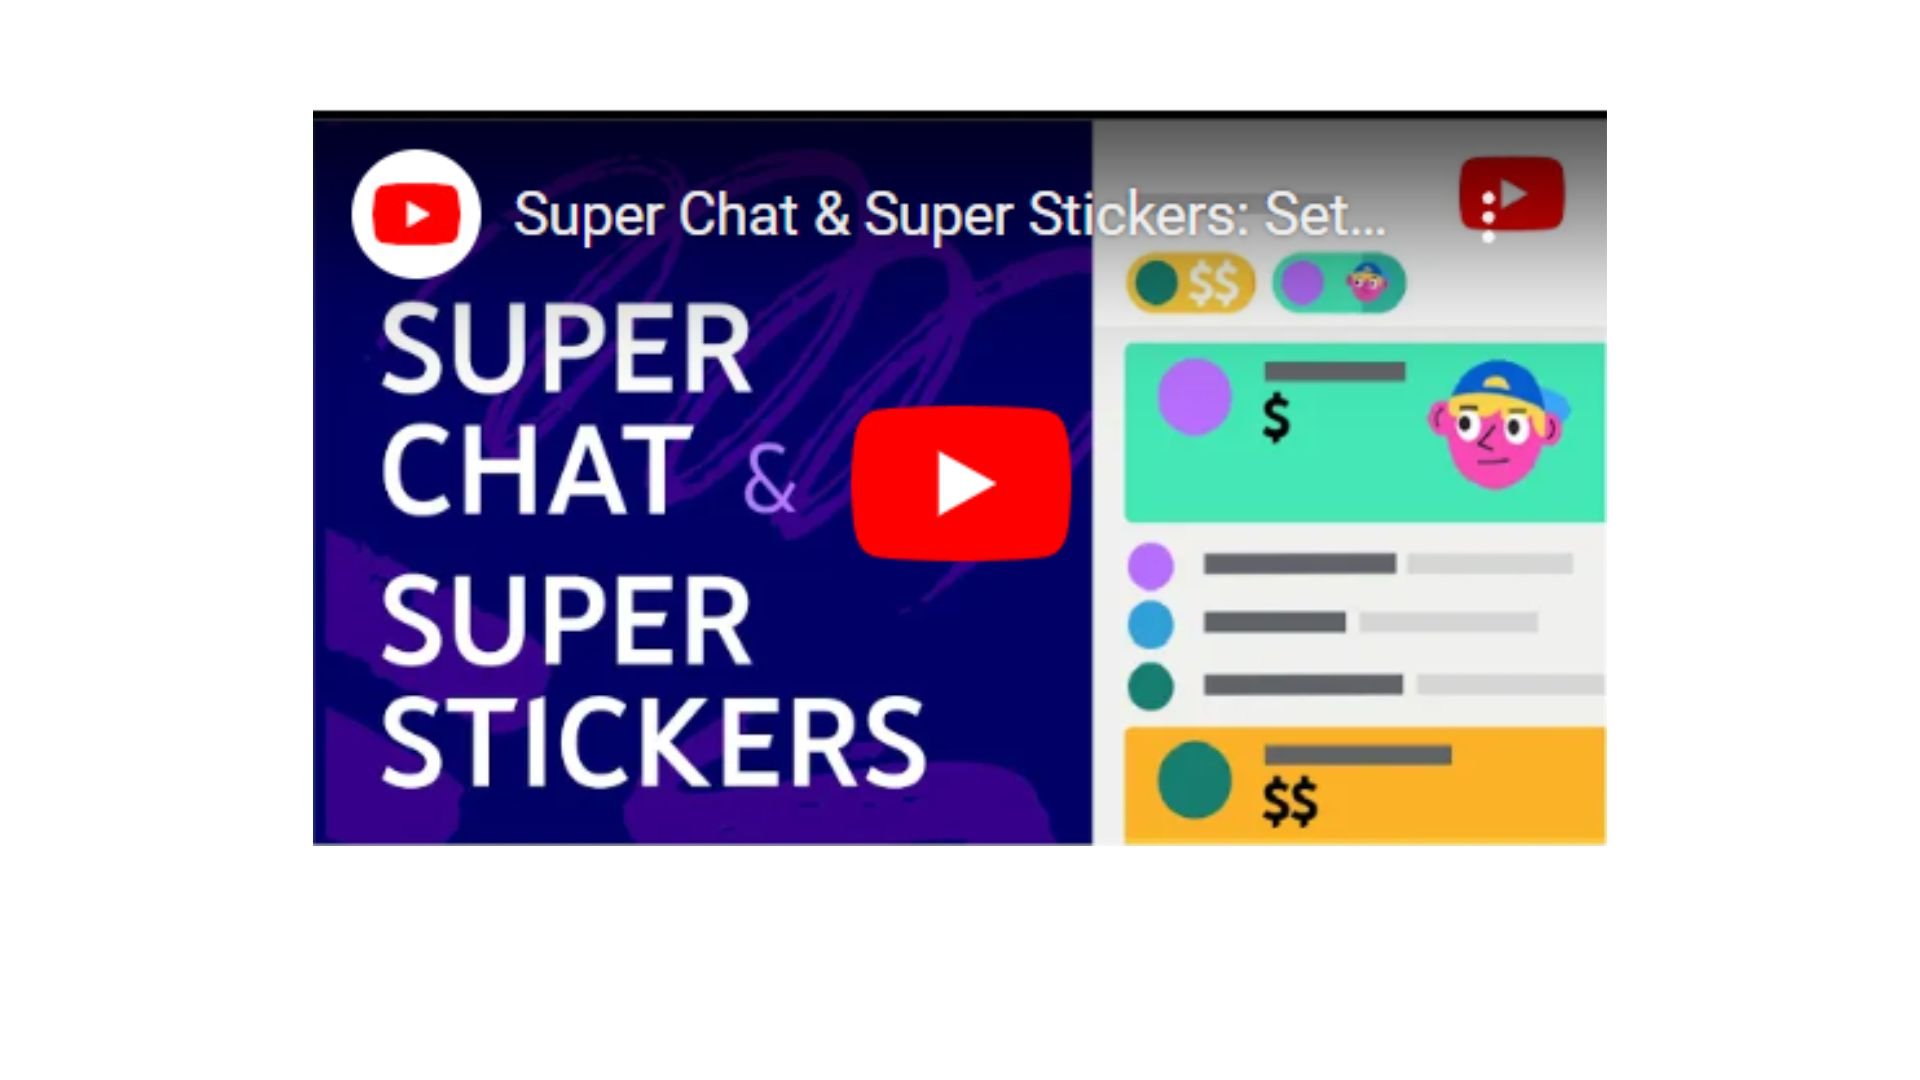 GET SUPER CHATS ON YOUTUBE